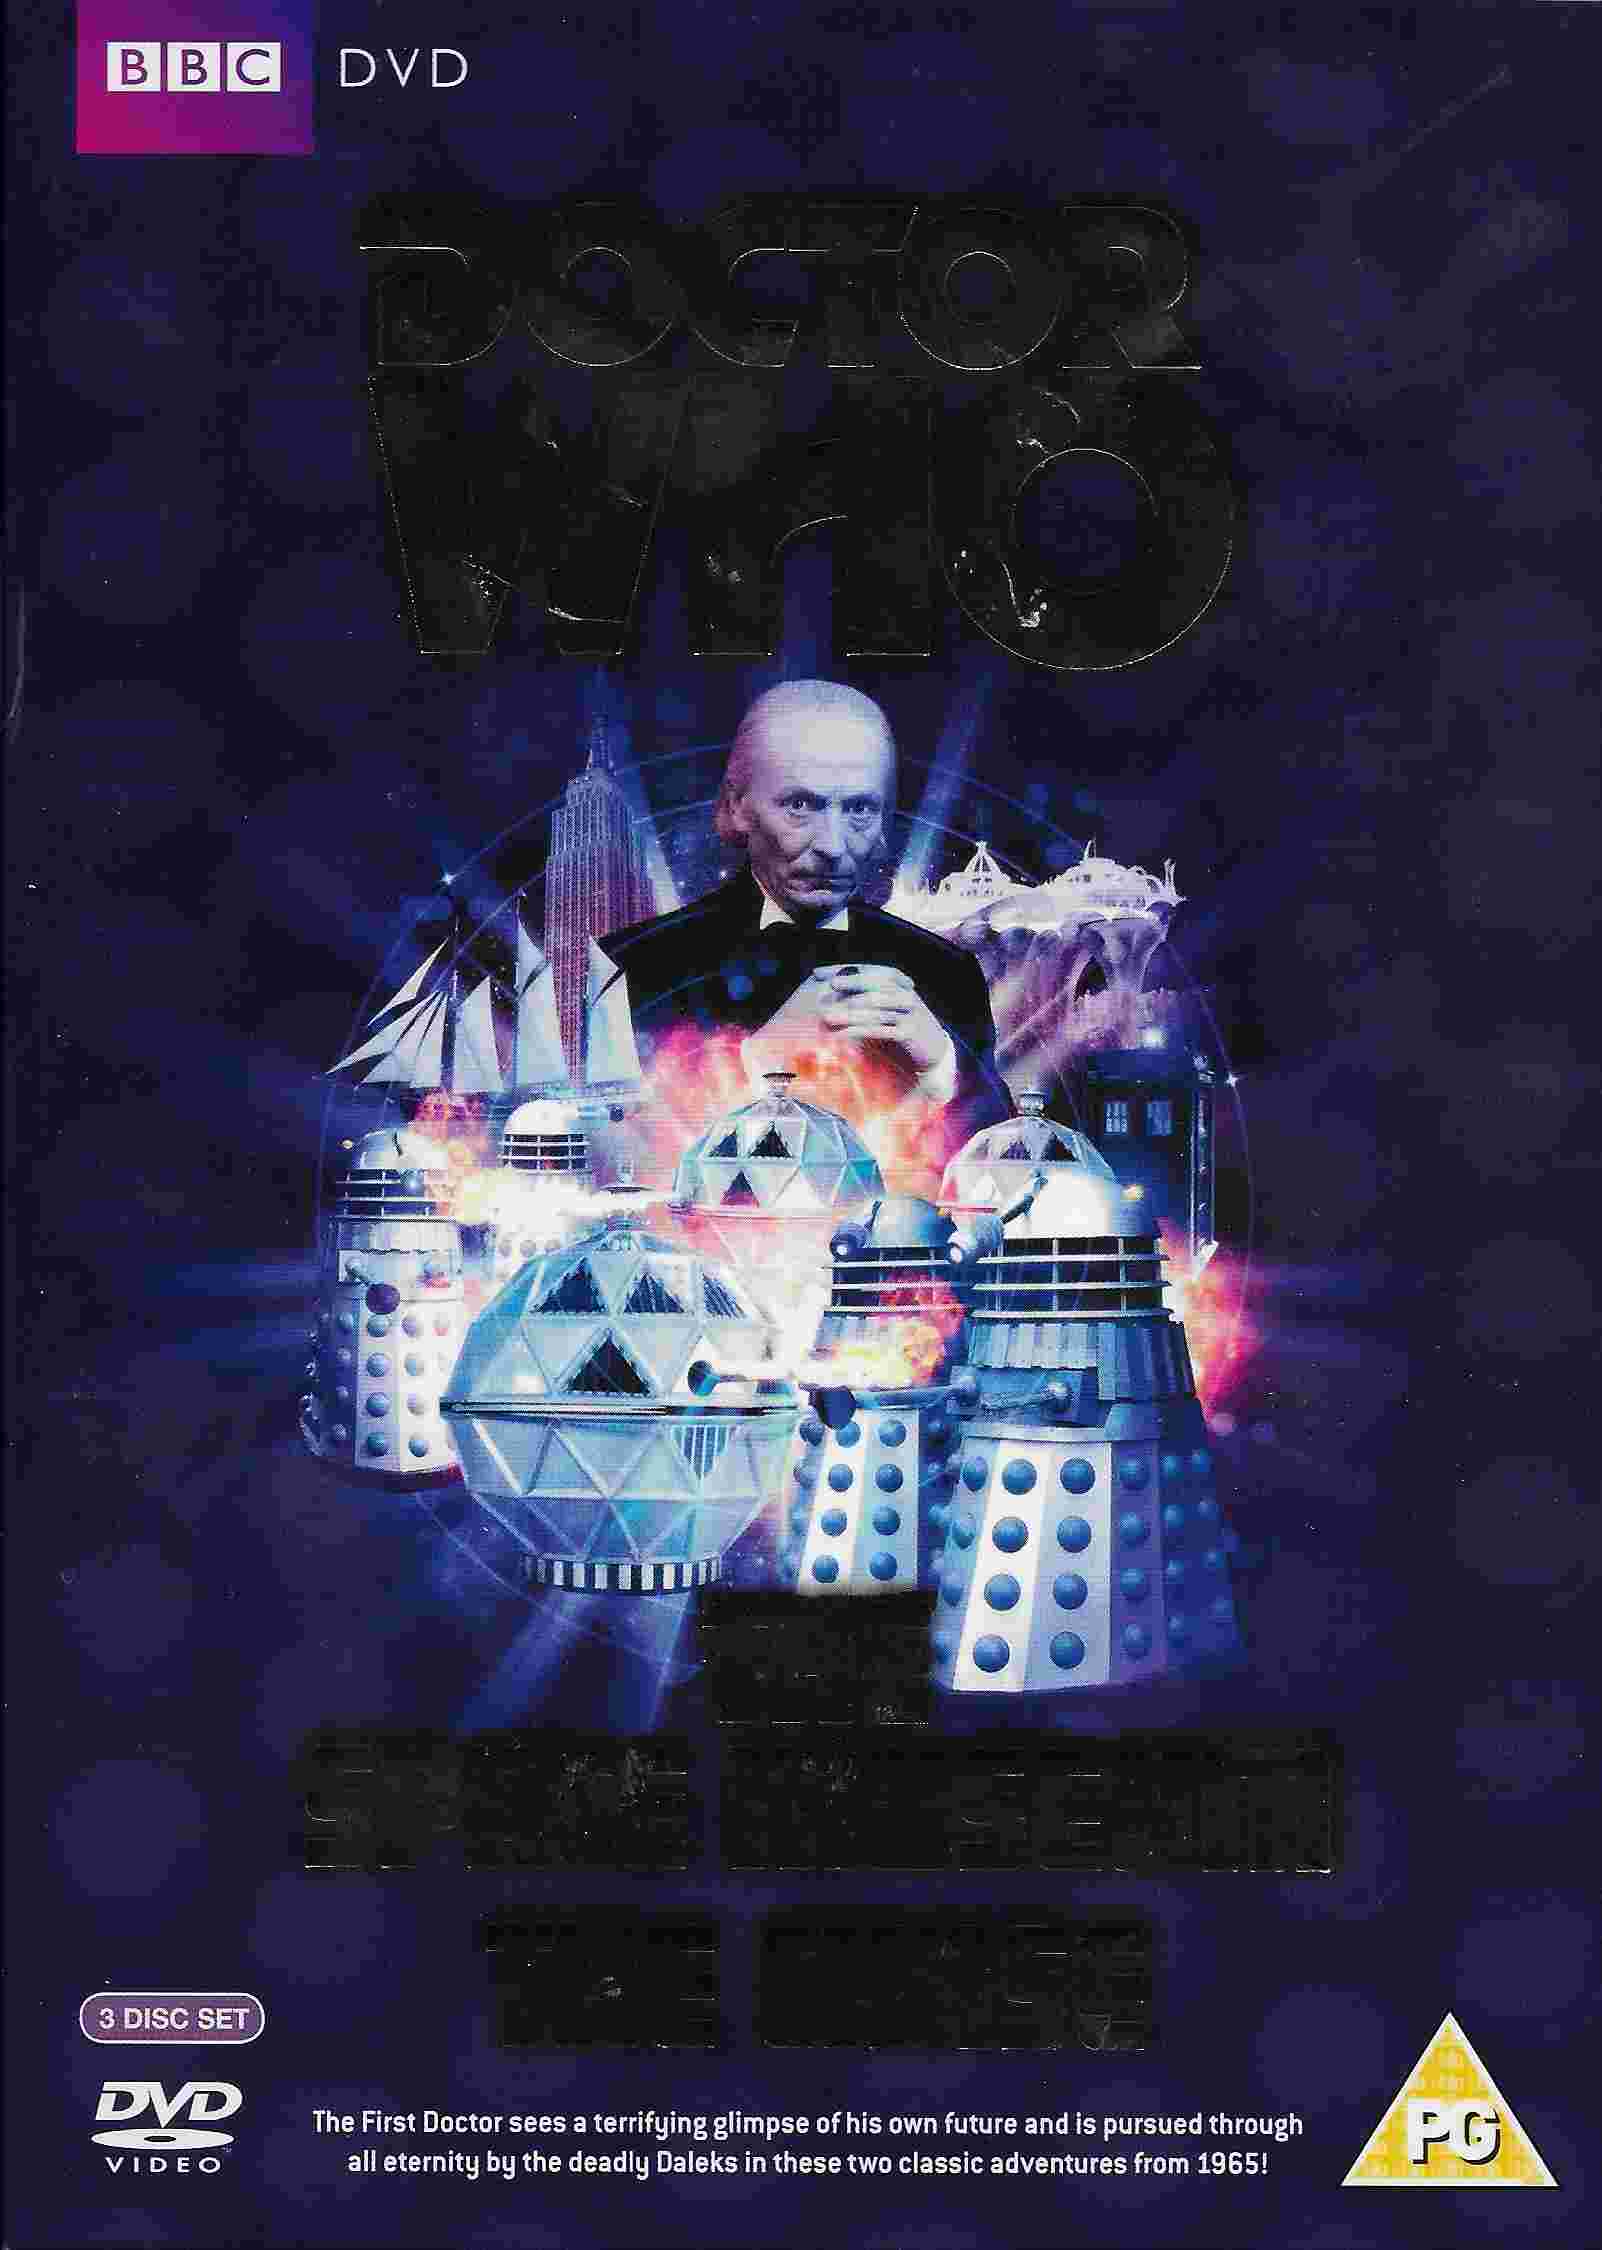 Picture of BBCDVD 2809 Doctor Who - The space museum / The chase by artist Glyn Jones / Terry Nation from the BBC dvds - Records and Tapes library